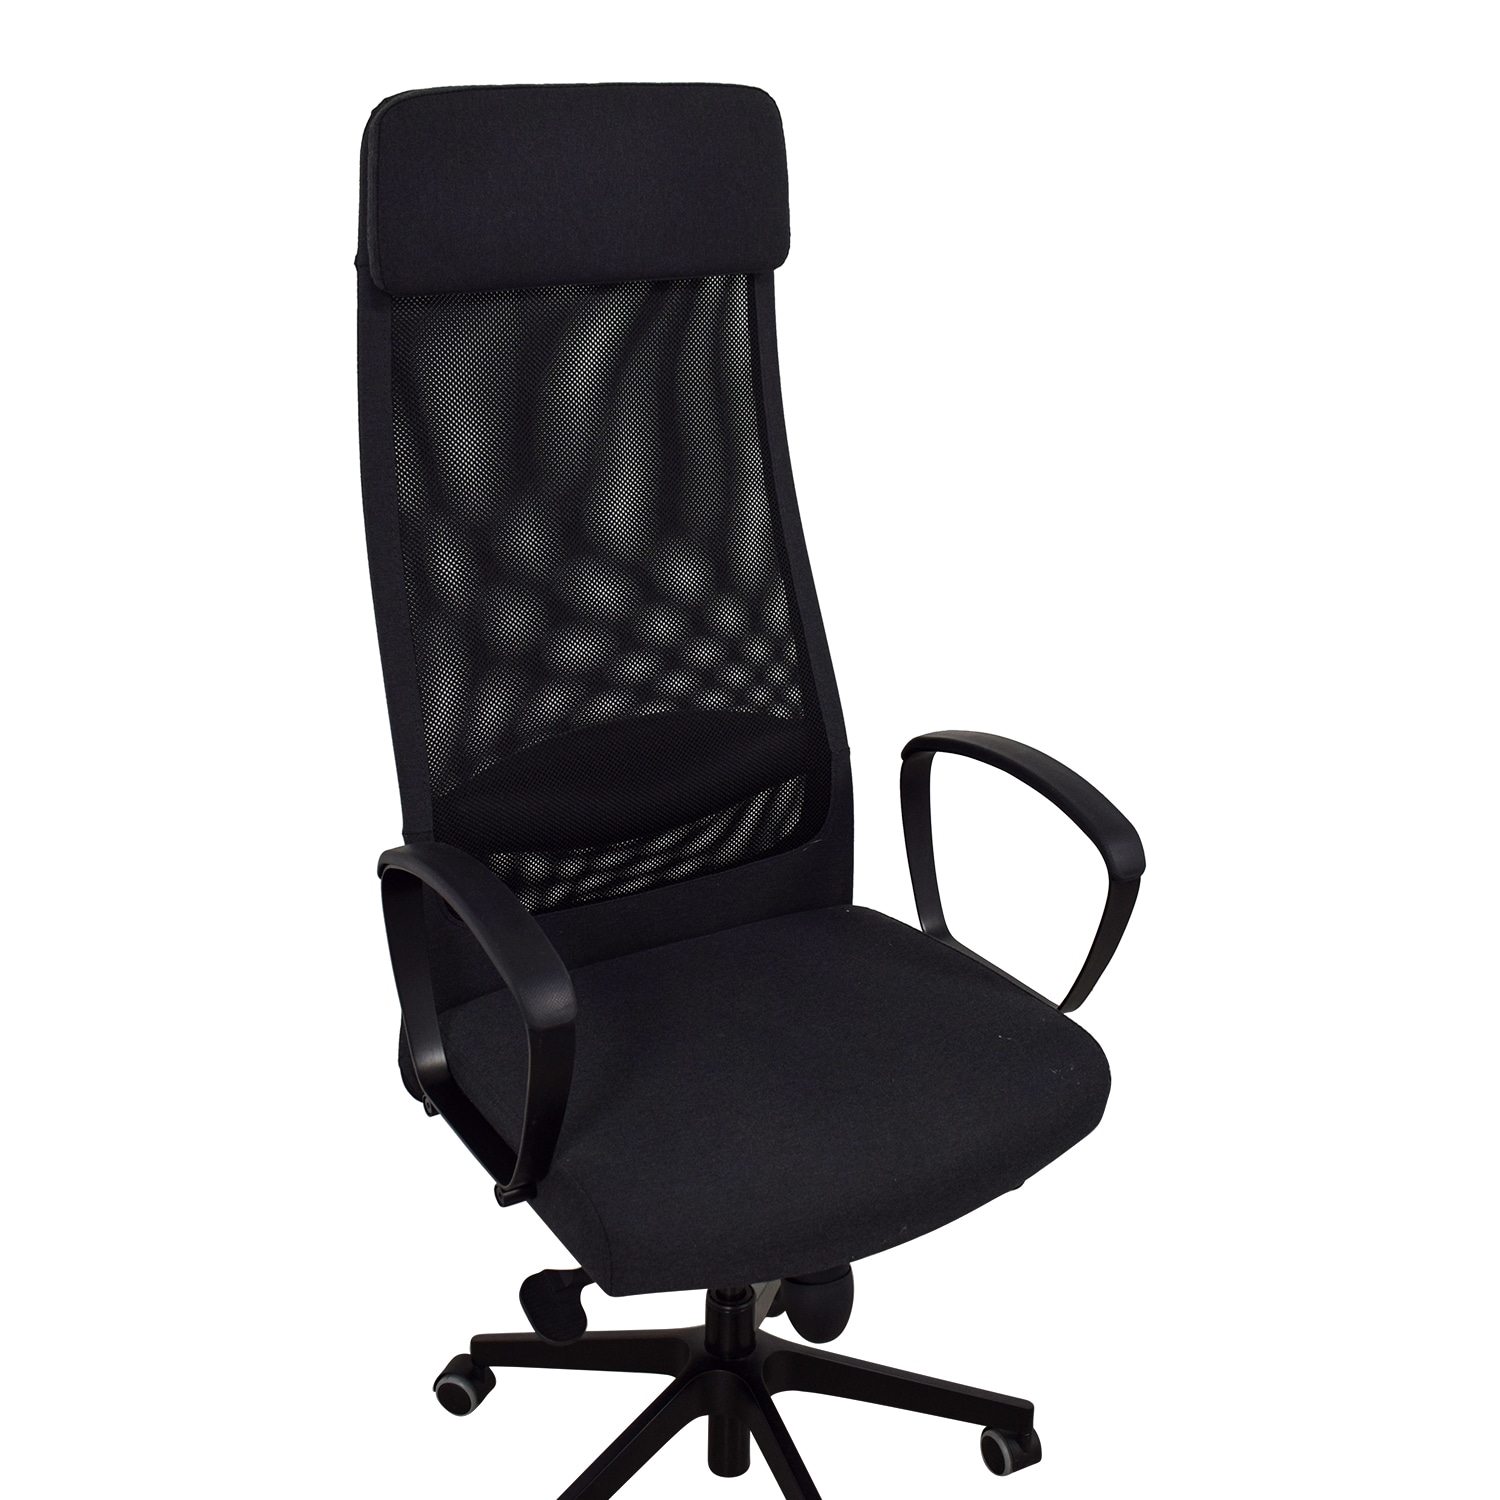 https://res.cloudinary.com/dkqtxtobb/image/upload/f_auto,q_auto:best,w_1500/product-assets/37018/ikea/chairs/home-office-chairs/second-hand-ikea-black-office-chair.jpeg